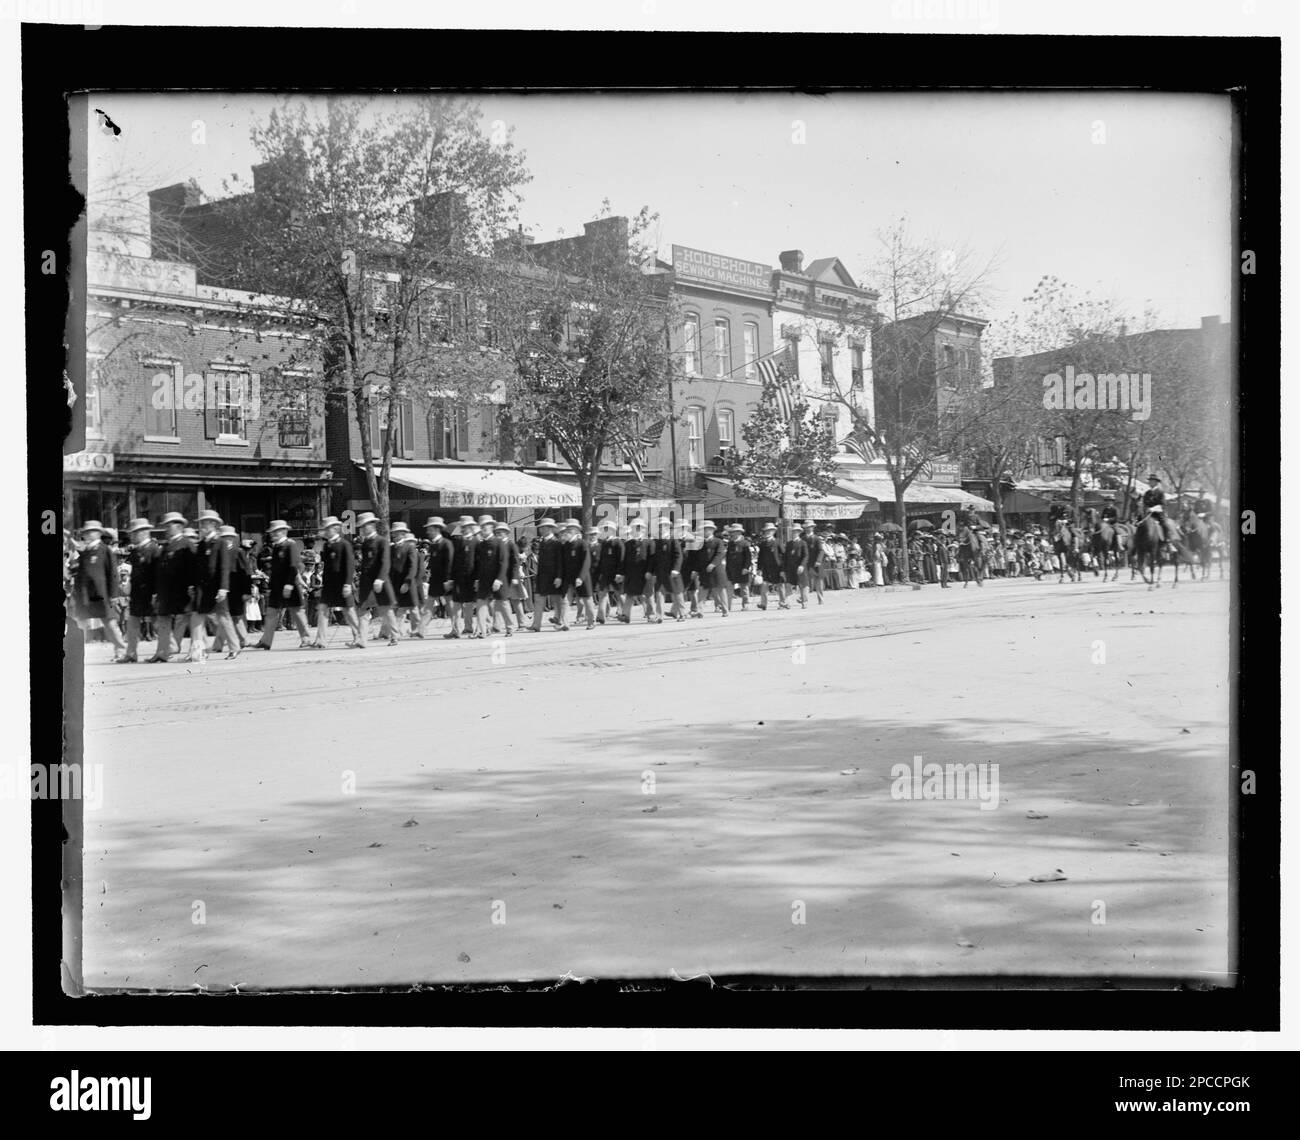 Rawlins Post of Minneapolis, Minn., which acted as escort to General Ell. Torrance, Comdr.-in-chief. Dressed in light overcoats & fedora hats. The 36th National Encampment of the G.A.R, Wash, D.C. Oct. 5-11, 1902, no. 10. Grand Army of the Republic, John A. Rawlins Post, No. 126 (Minneapolis, Minn.) , Grand Army of the Republic, National Encampment, (36th :, 1902 :, Washington, D.C.) , United States, History, Civil War, 1861-1865, Veterans, Commemorations, Washington (D.C.), 1900-1910, Military parades & ceremonies, Washington (D.C.), 1900-1910. Stock Photo